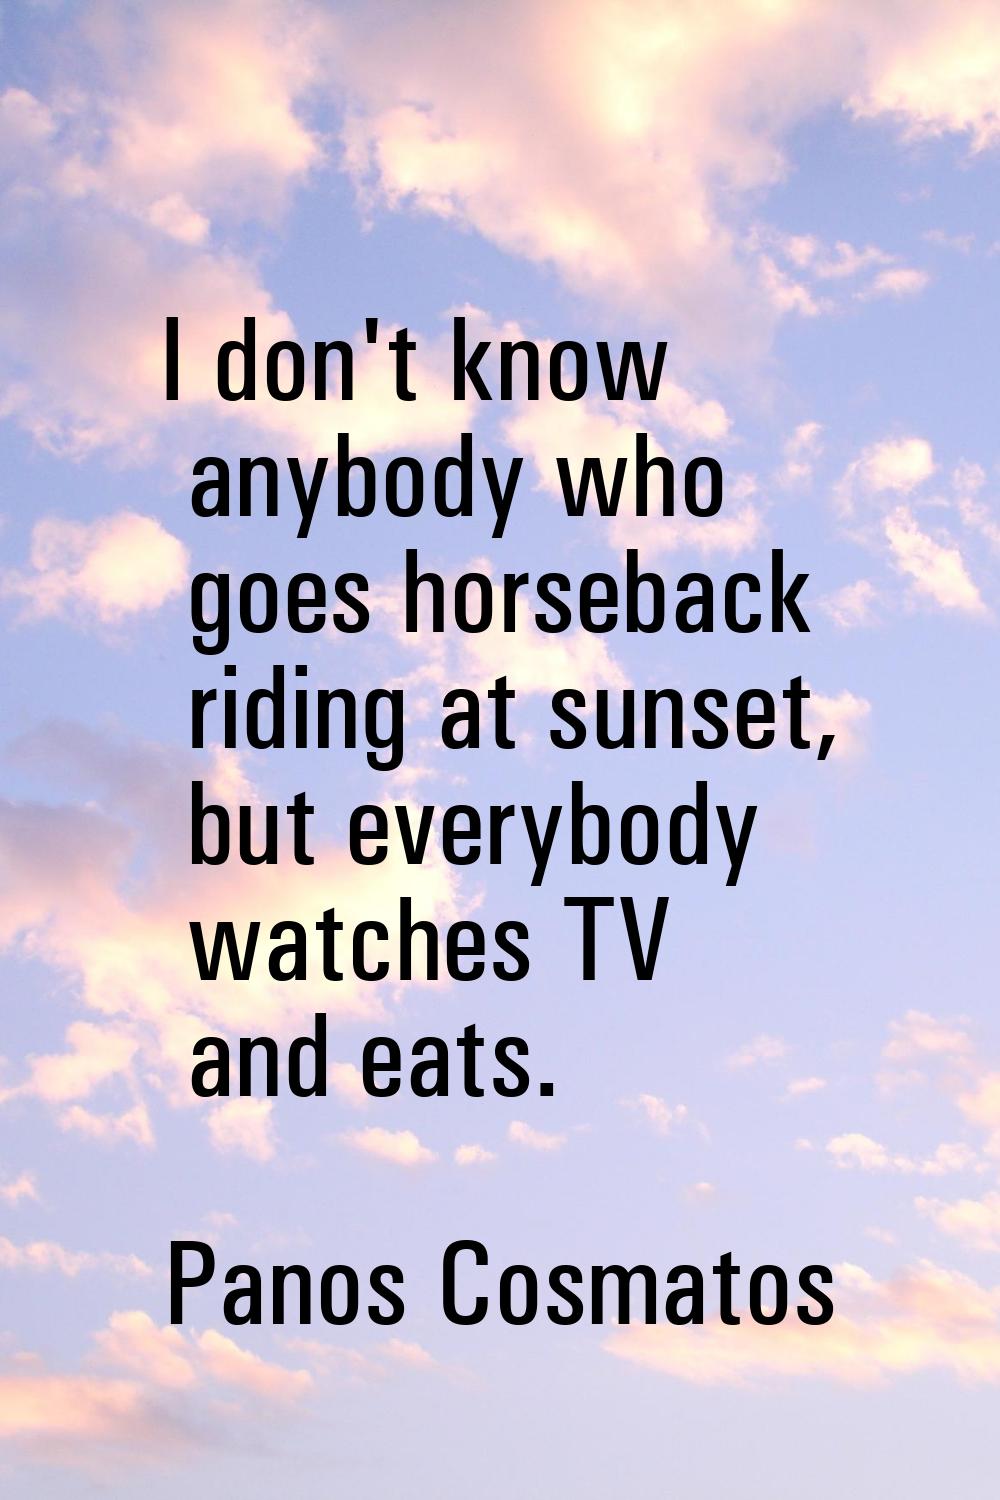 I don't know anybody who goes horseback riding at sunset, but everybody watches TV and eats.